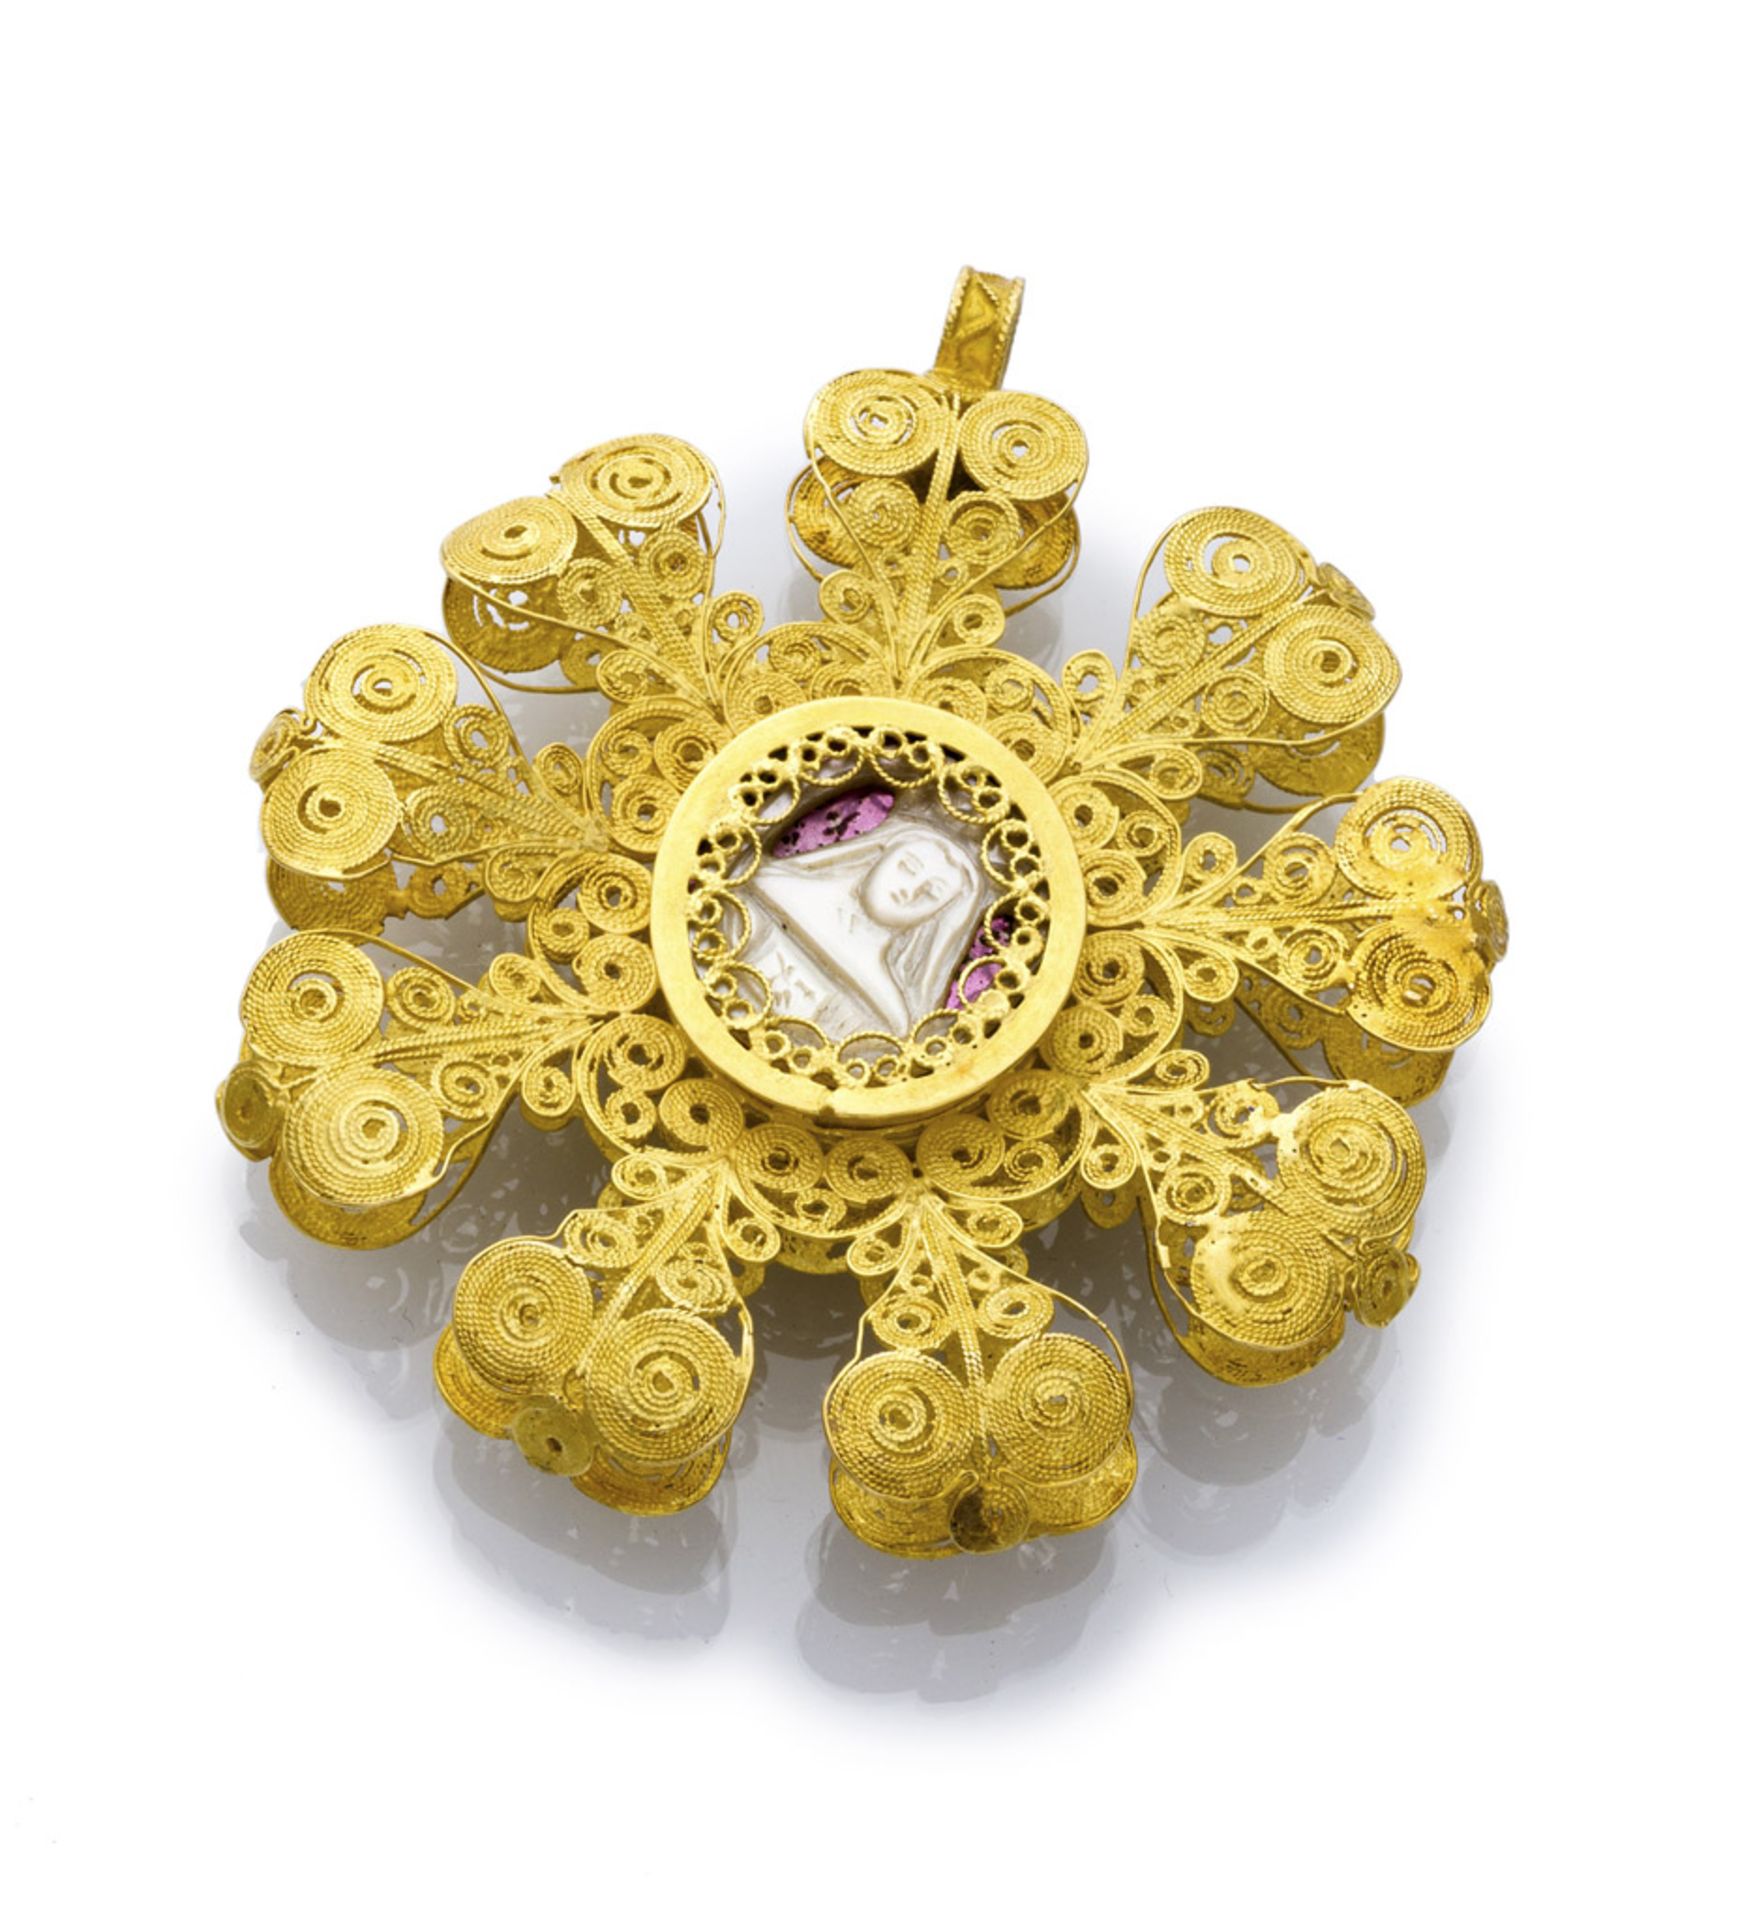 PENDANT in yellow gold 18 kts. round shape, crafted in filigree and finishes in nacre representing